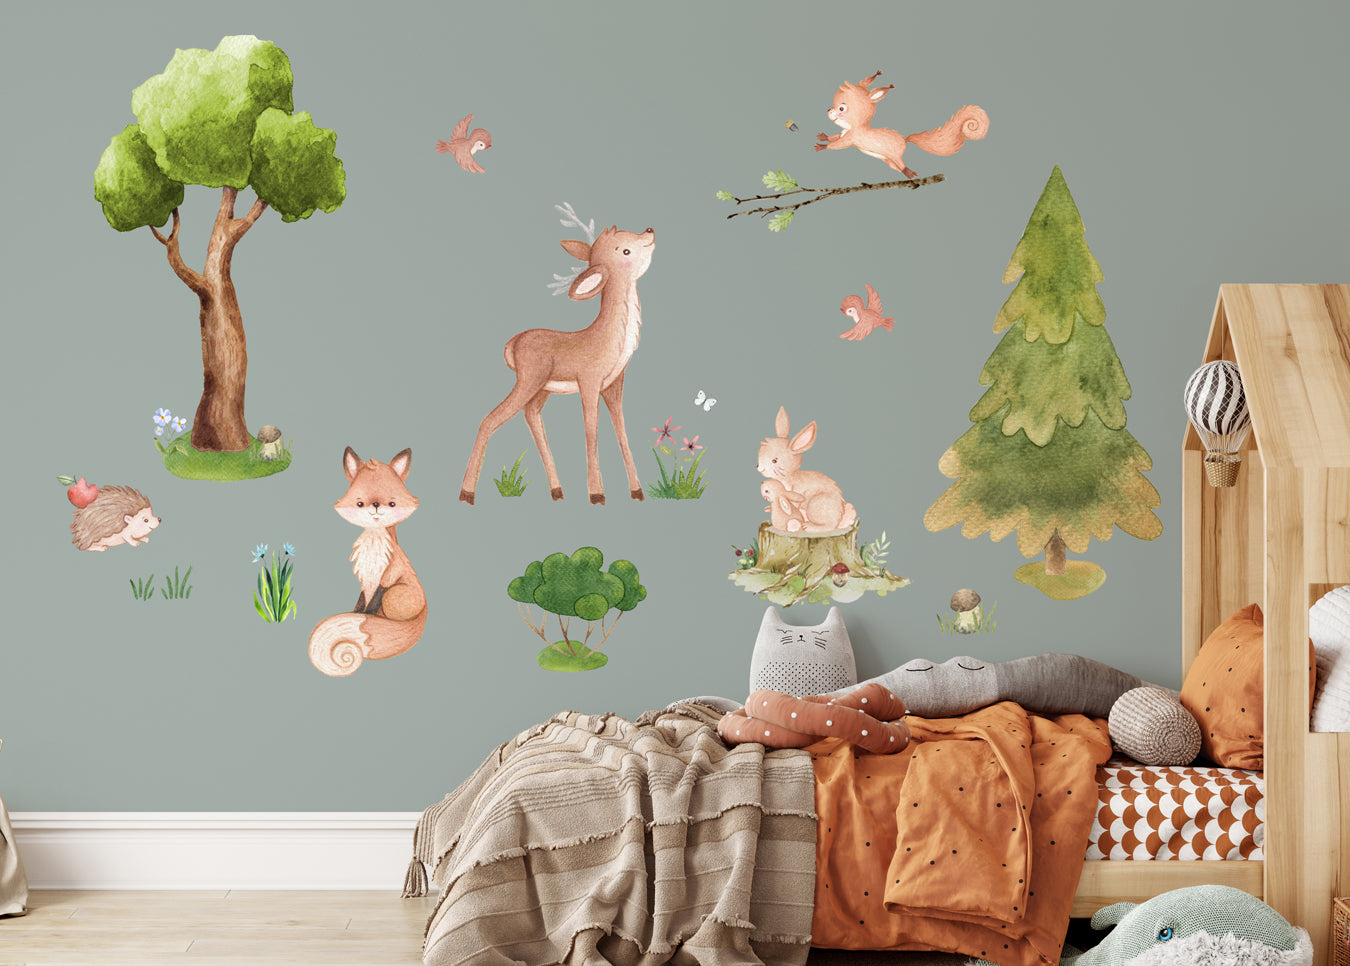 Baby Room Stickers, Children's Wall Stickers, Animal Stickers